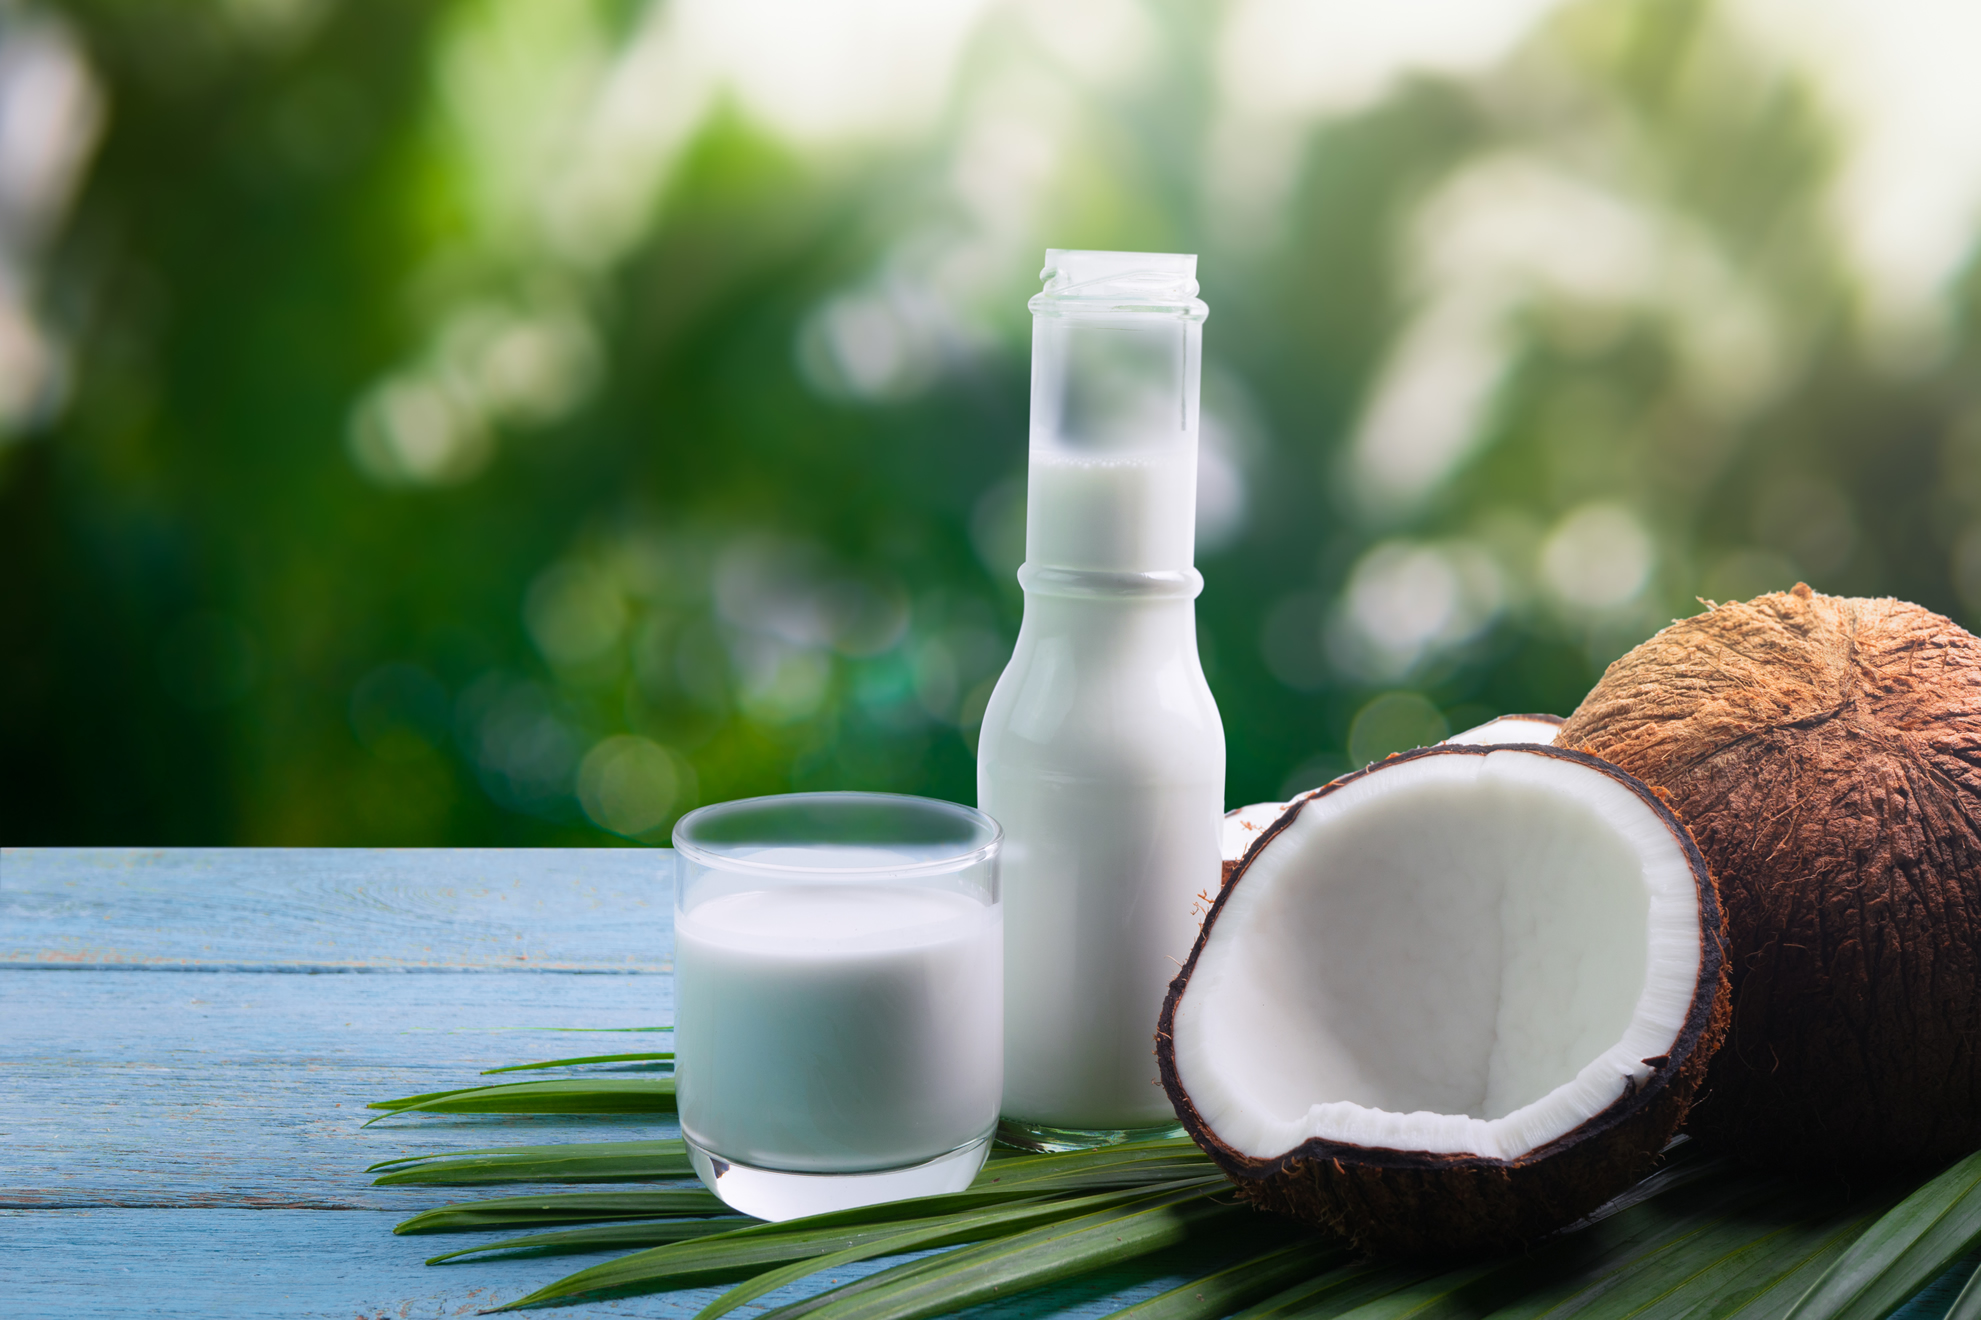 Massaging Coconut Oil for Cellulite: Does it Work?